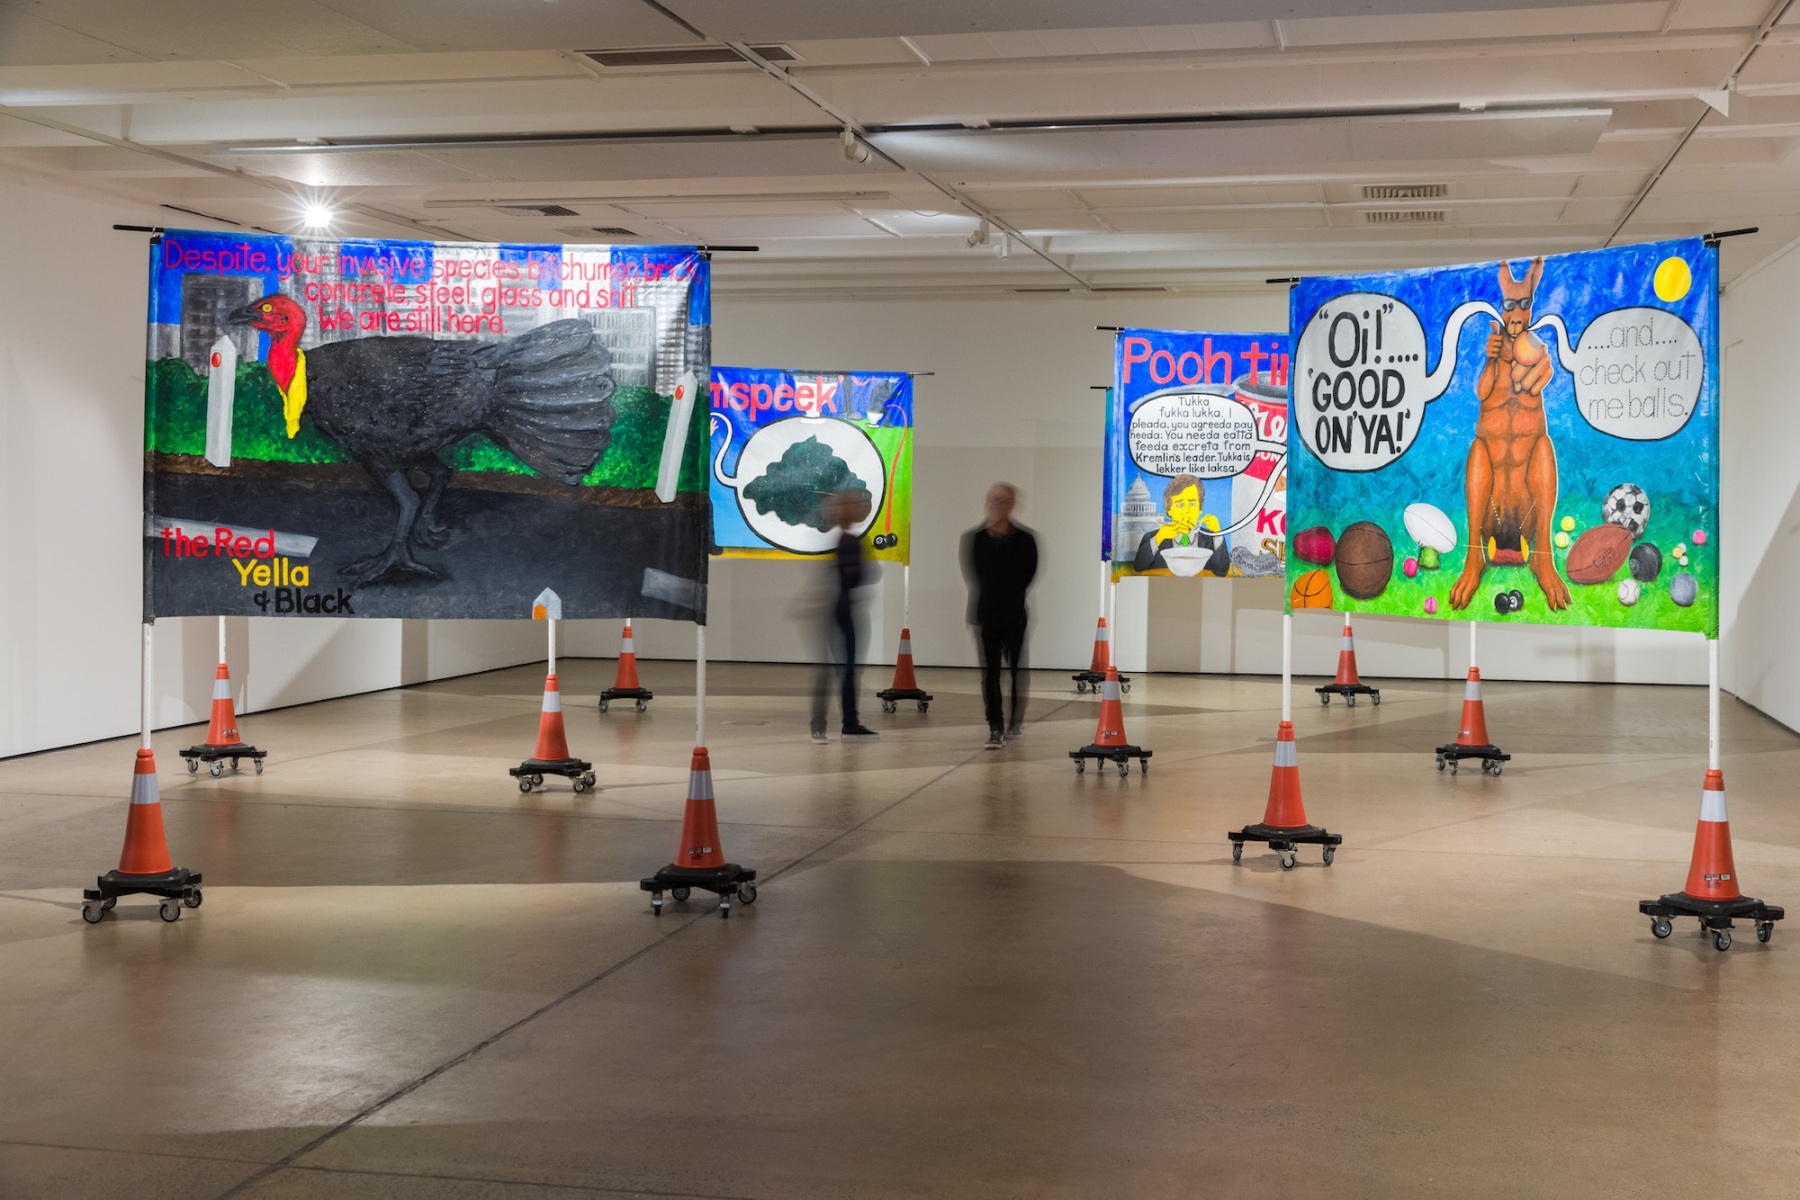 Painted banners, suspended between poles that are standing in traffic cones, fill the gallery